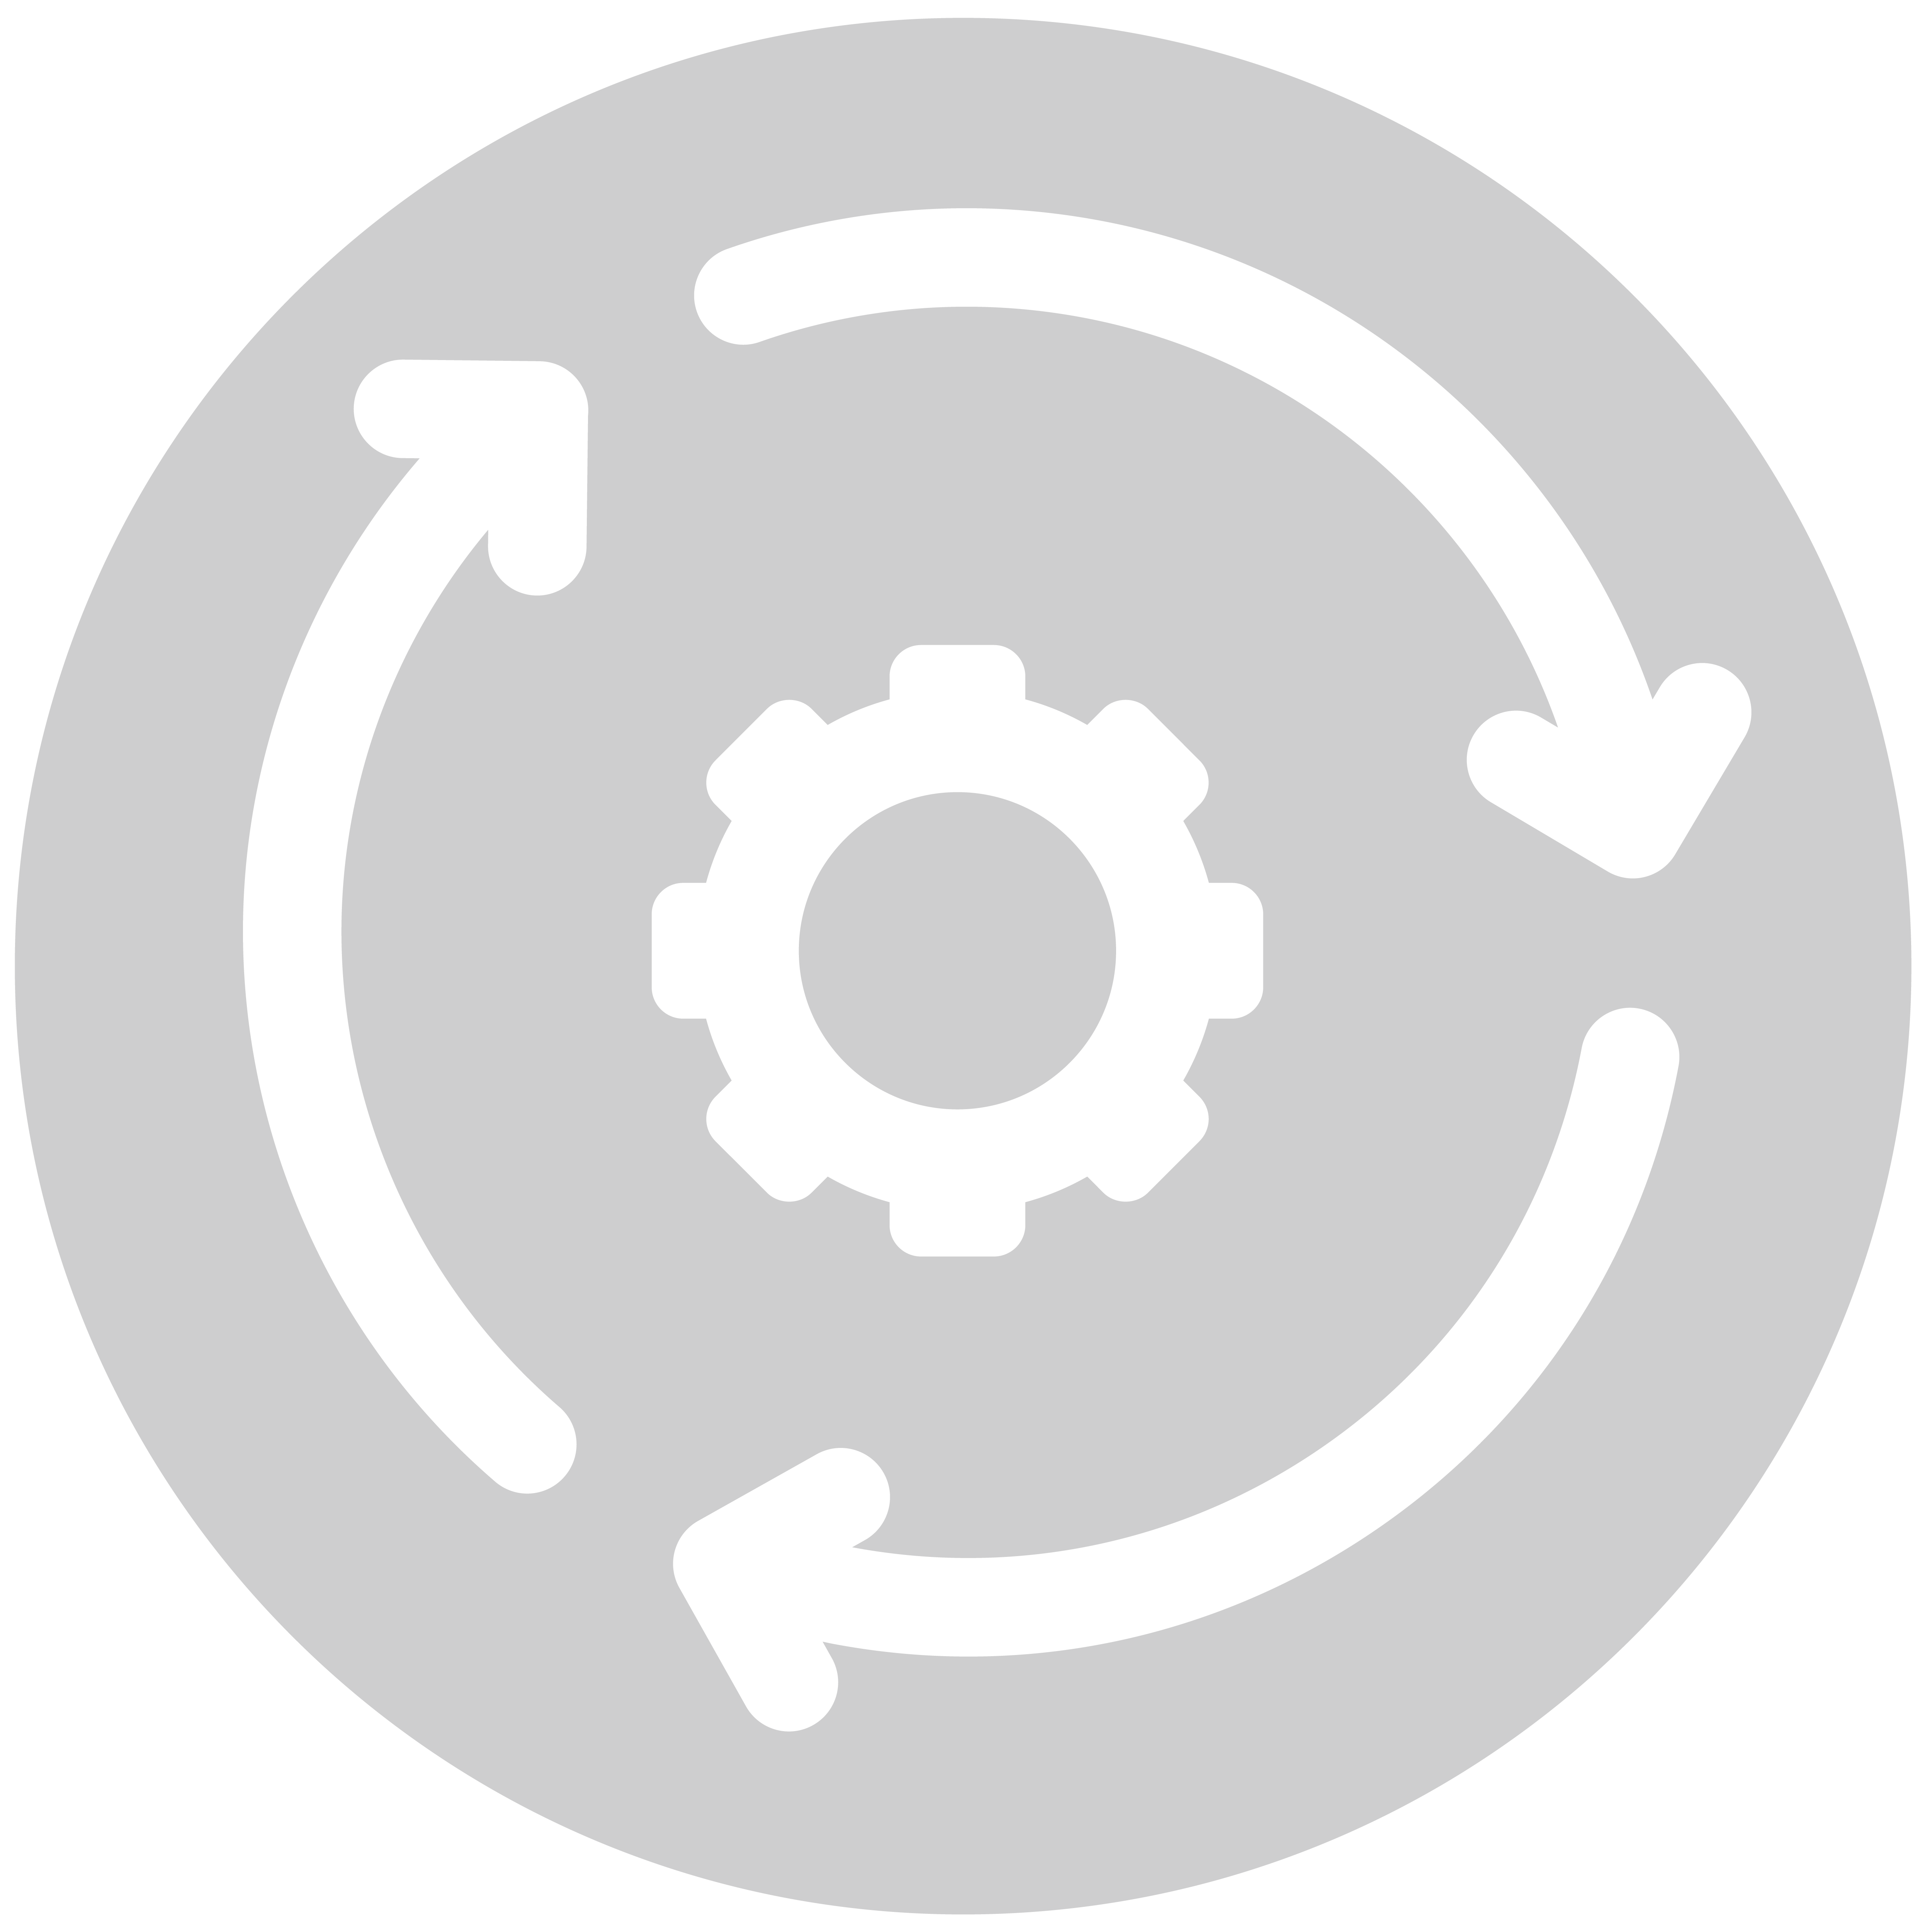 Icon Devops and Automation, represents Devops and automation processes